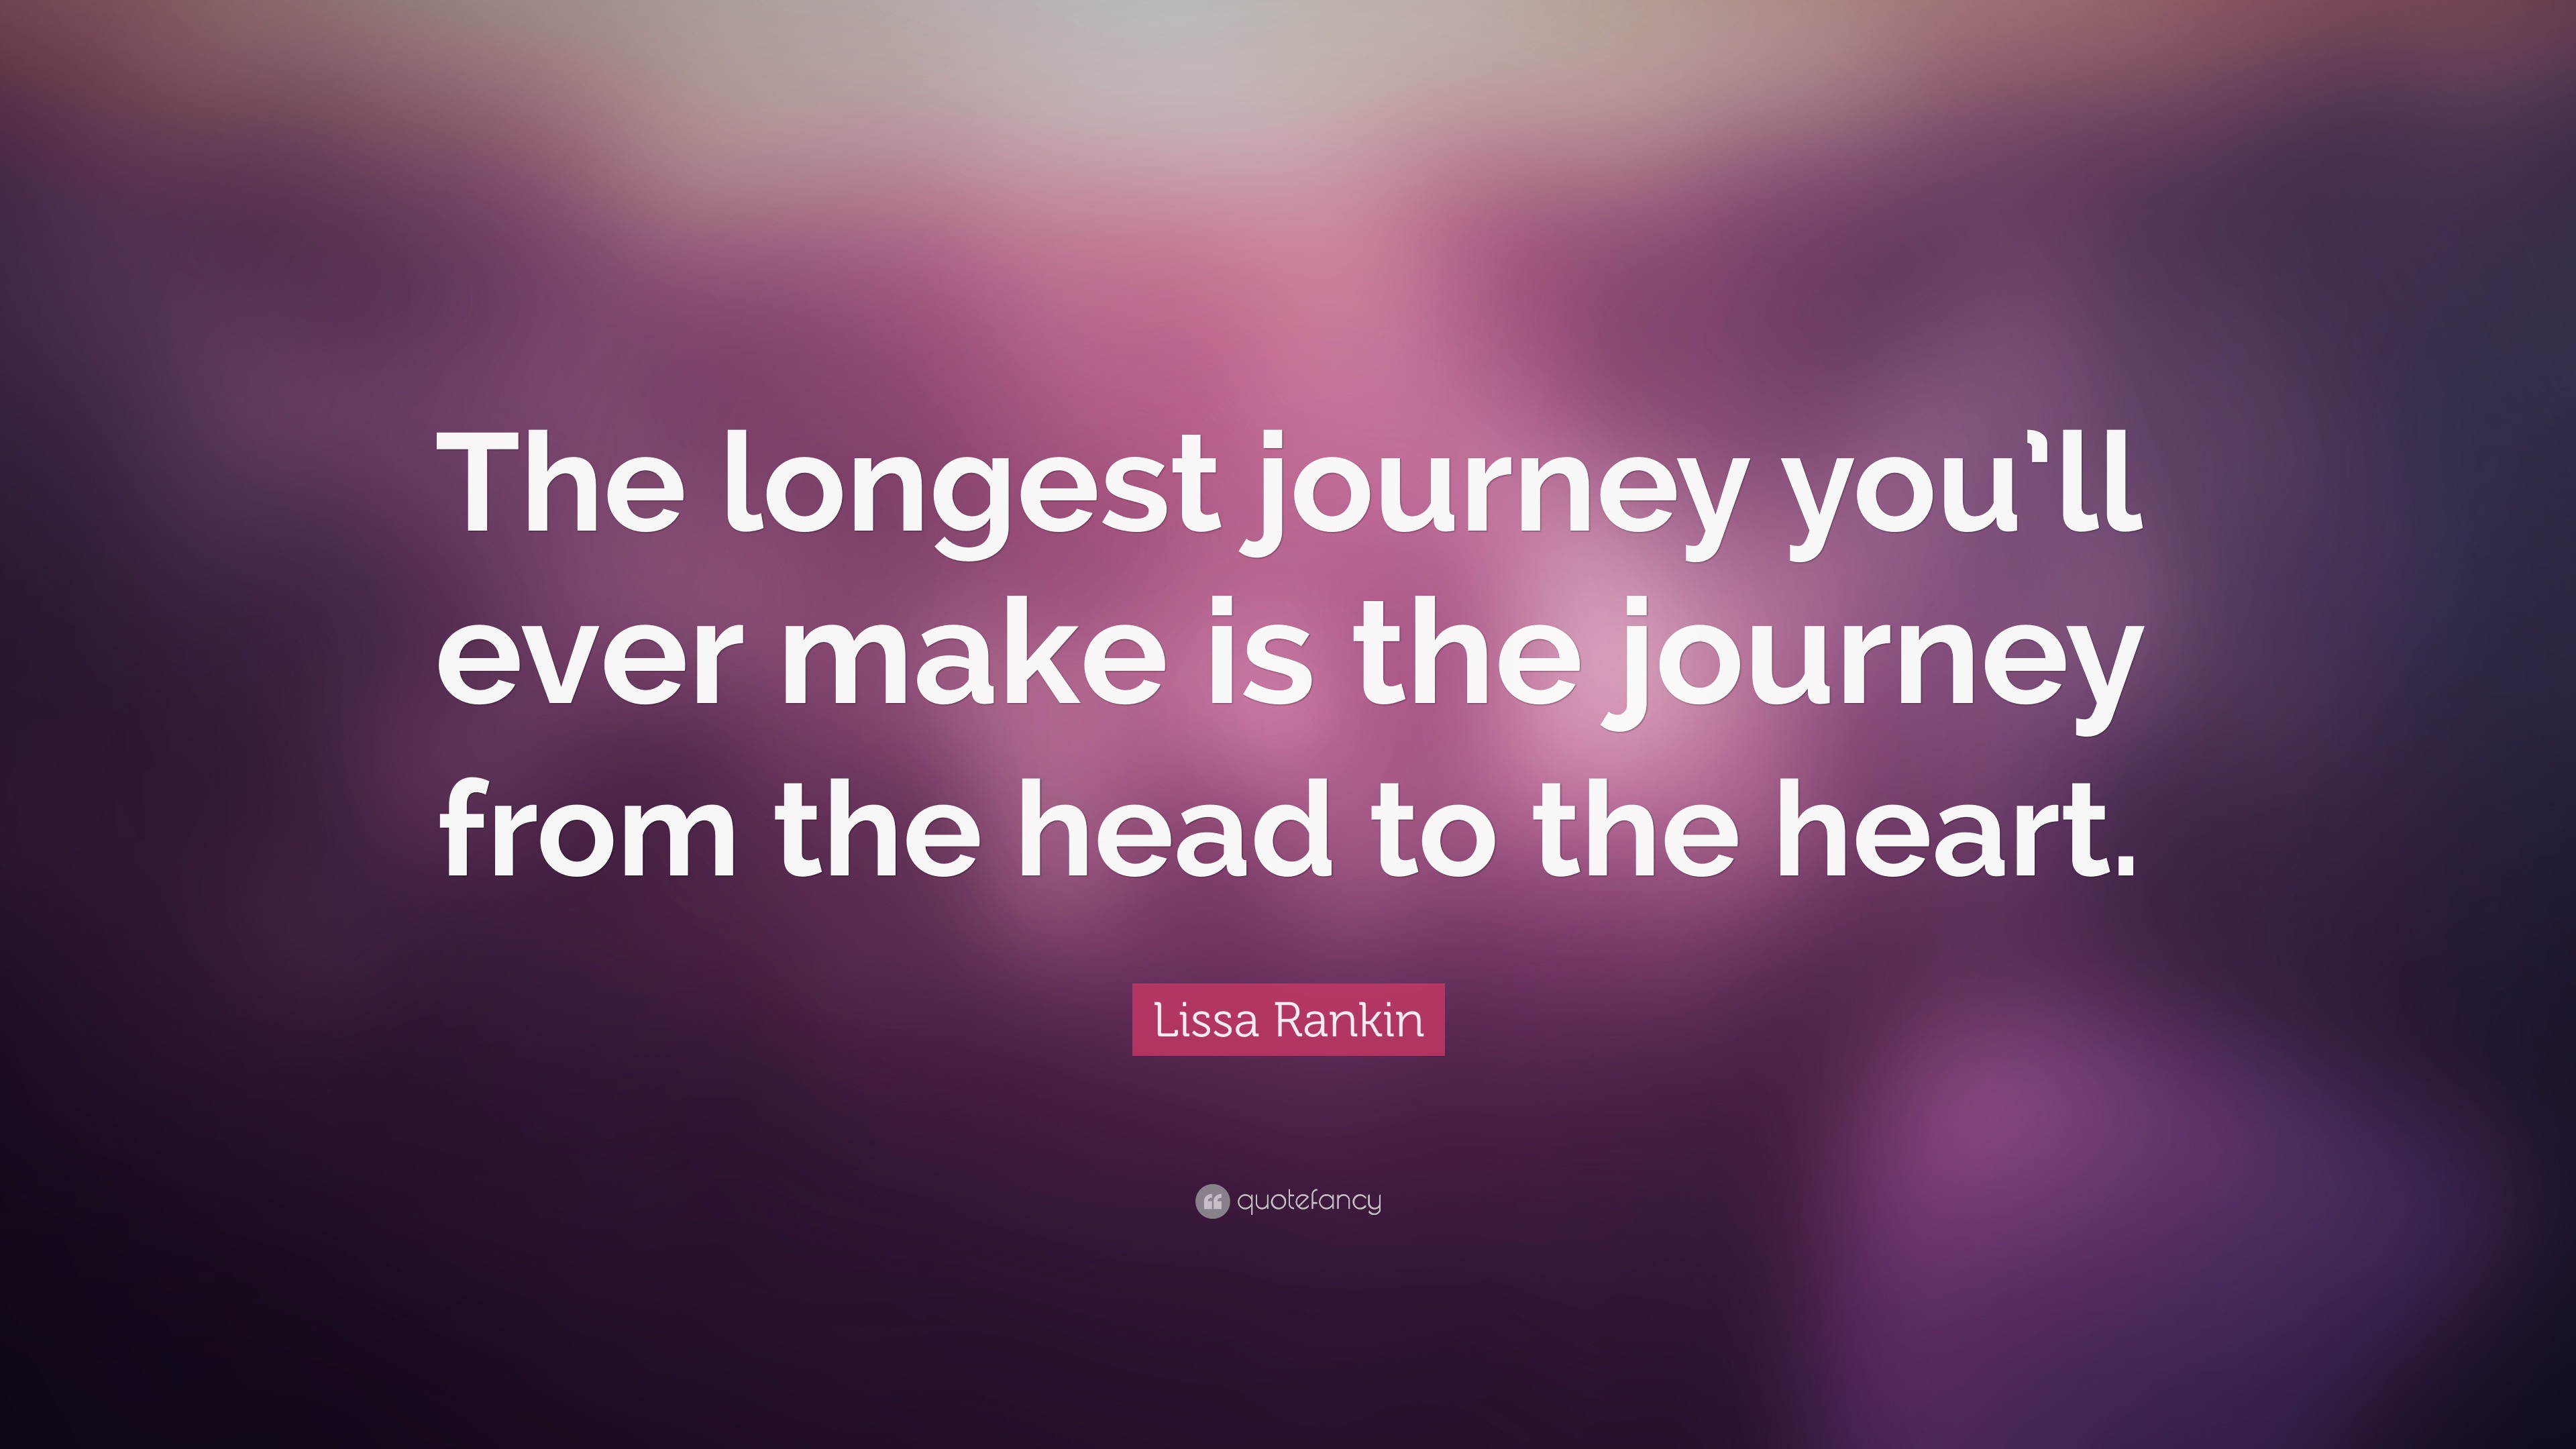 Lissa Rankin Quote: “The longest journey you’ll ever make is the ...